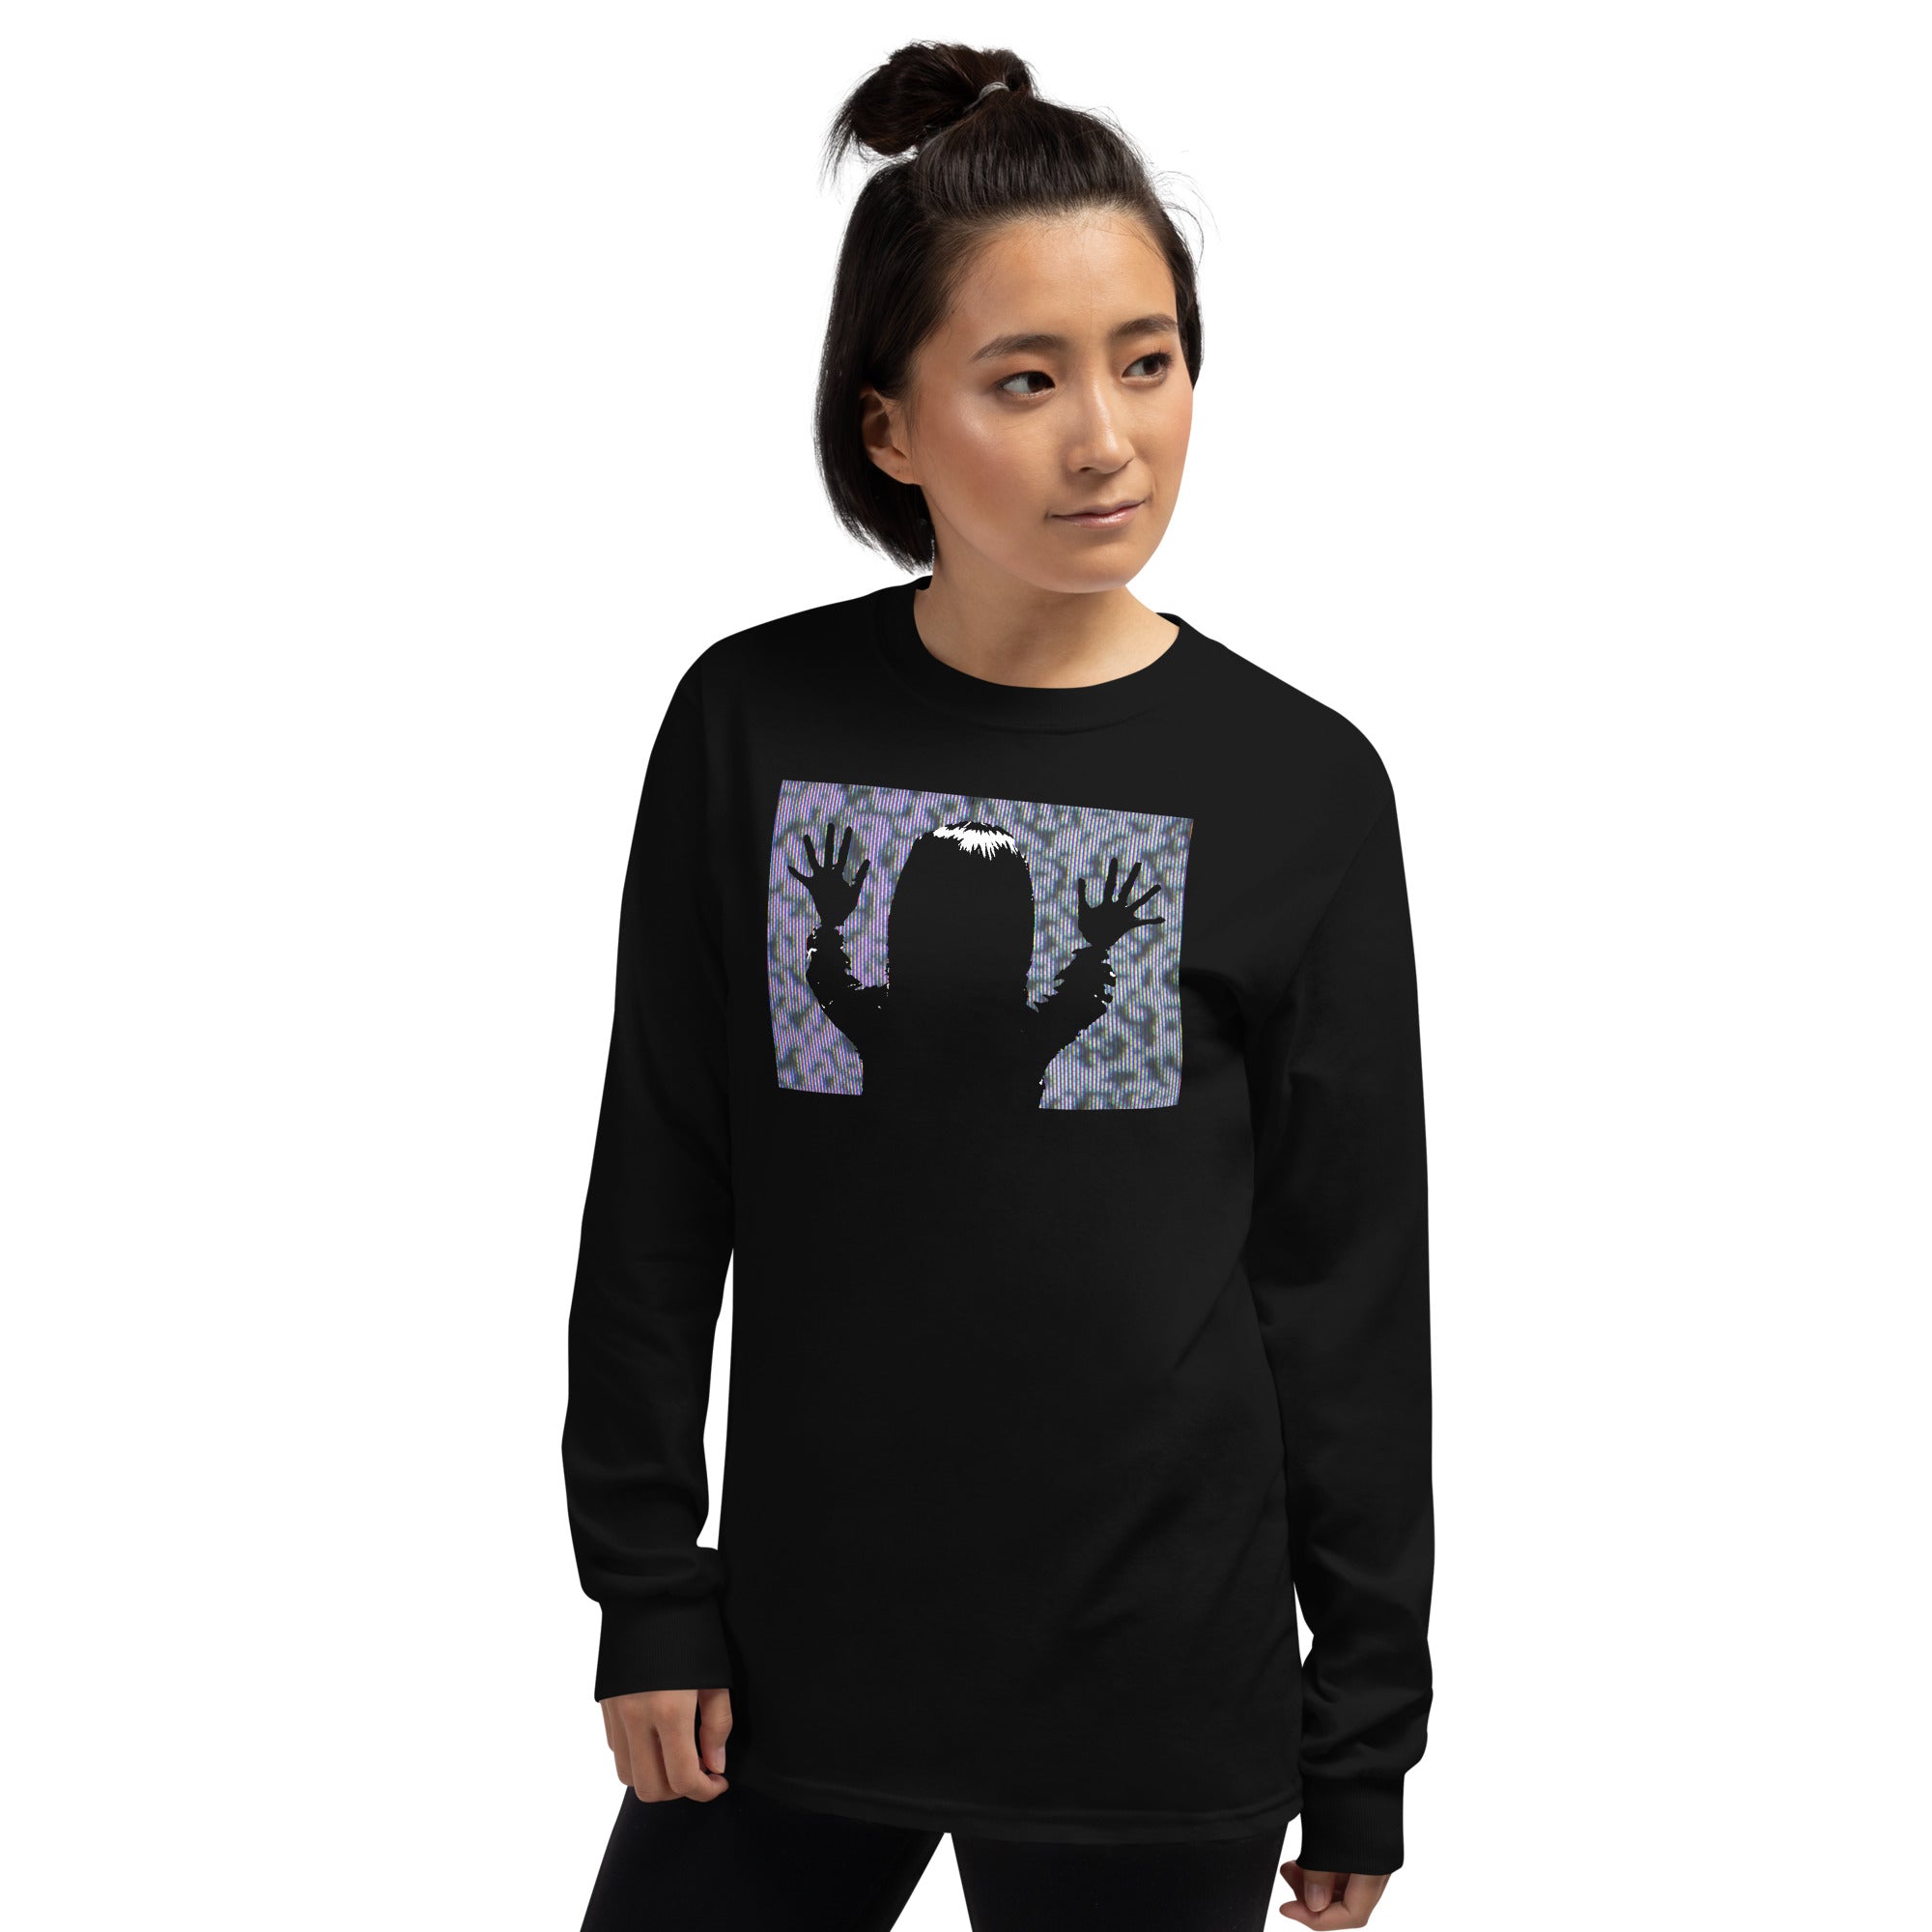 "They're Here" Carol Anne Poltergeist Long Sleeve Shirt